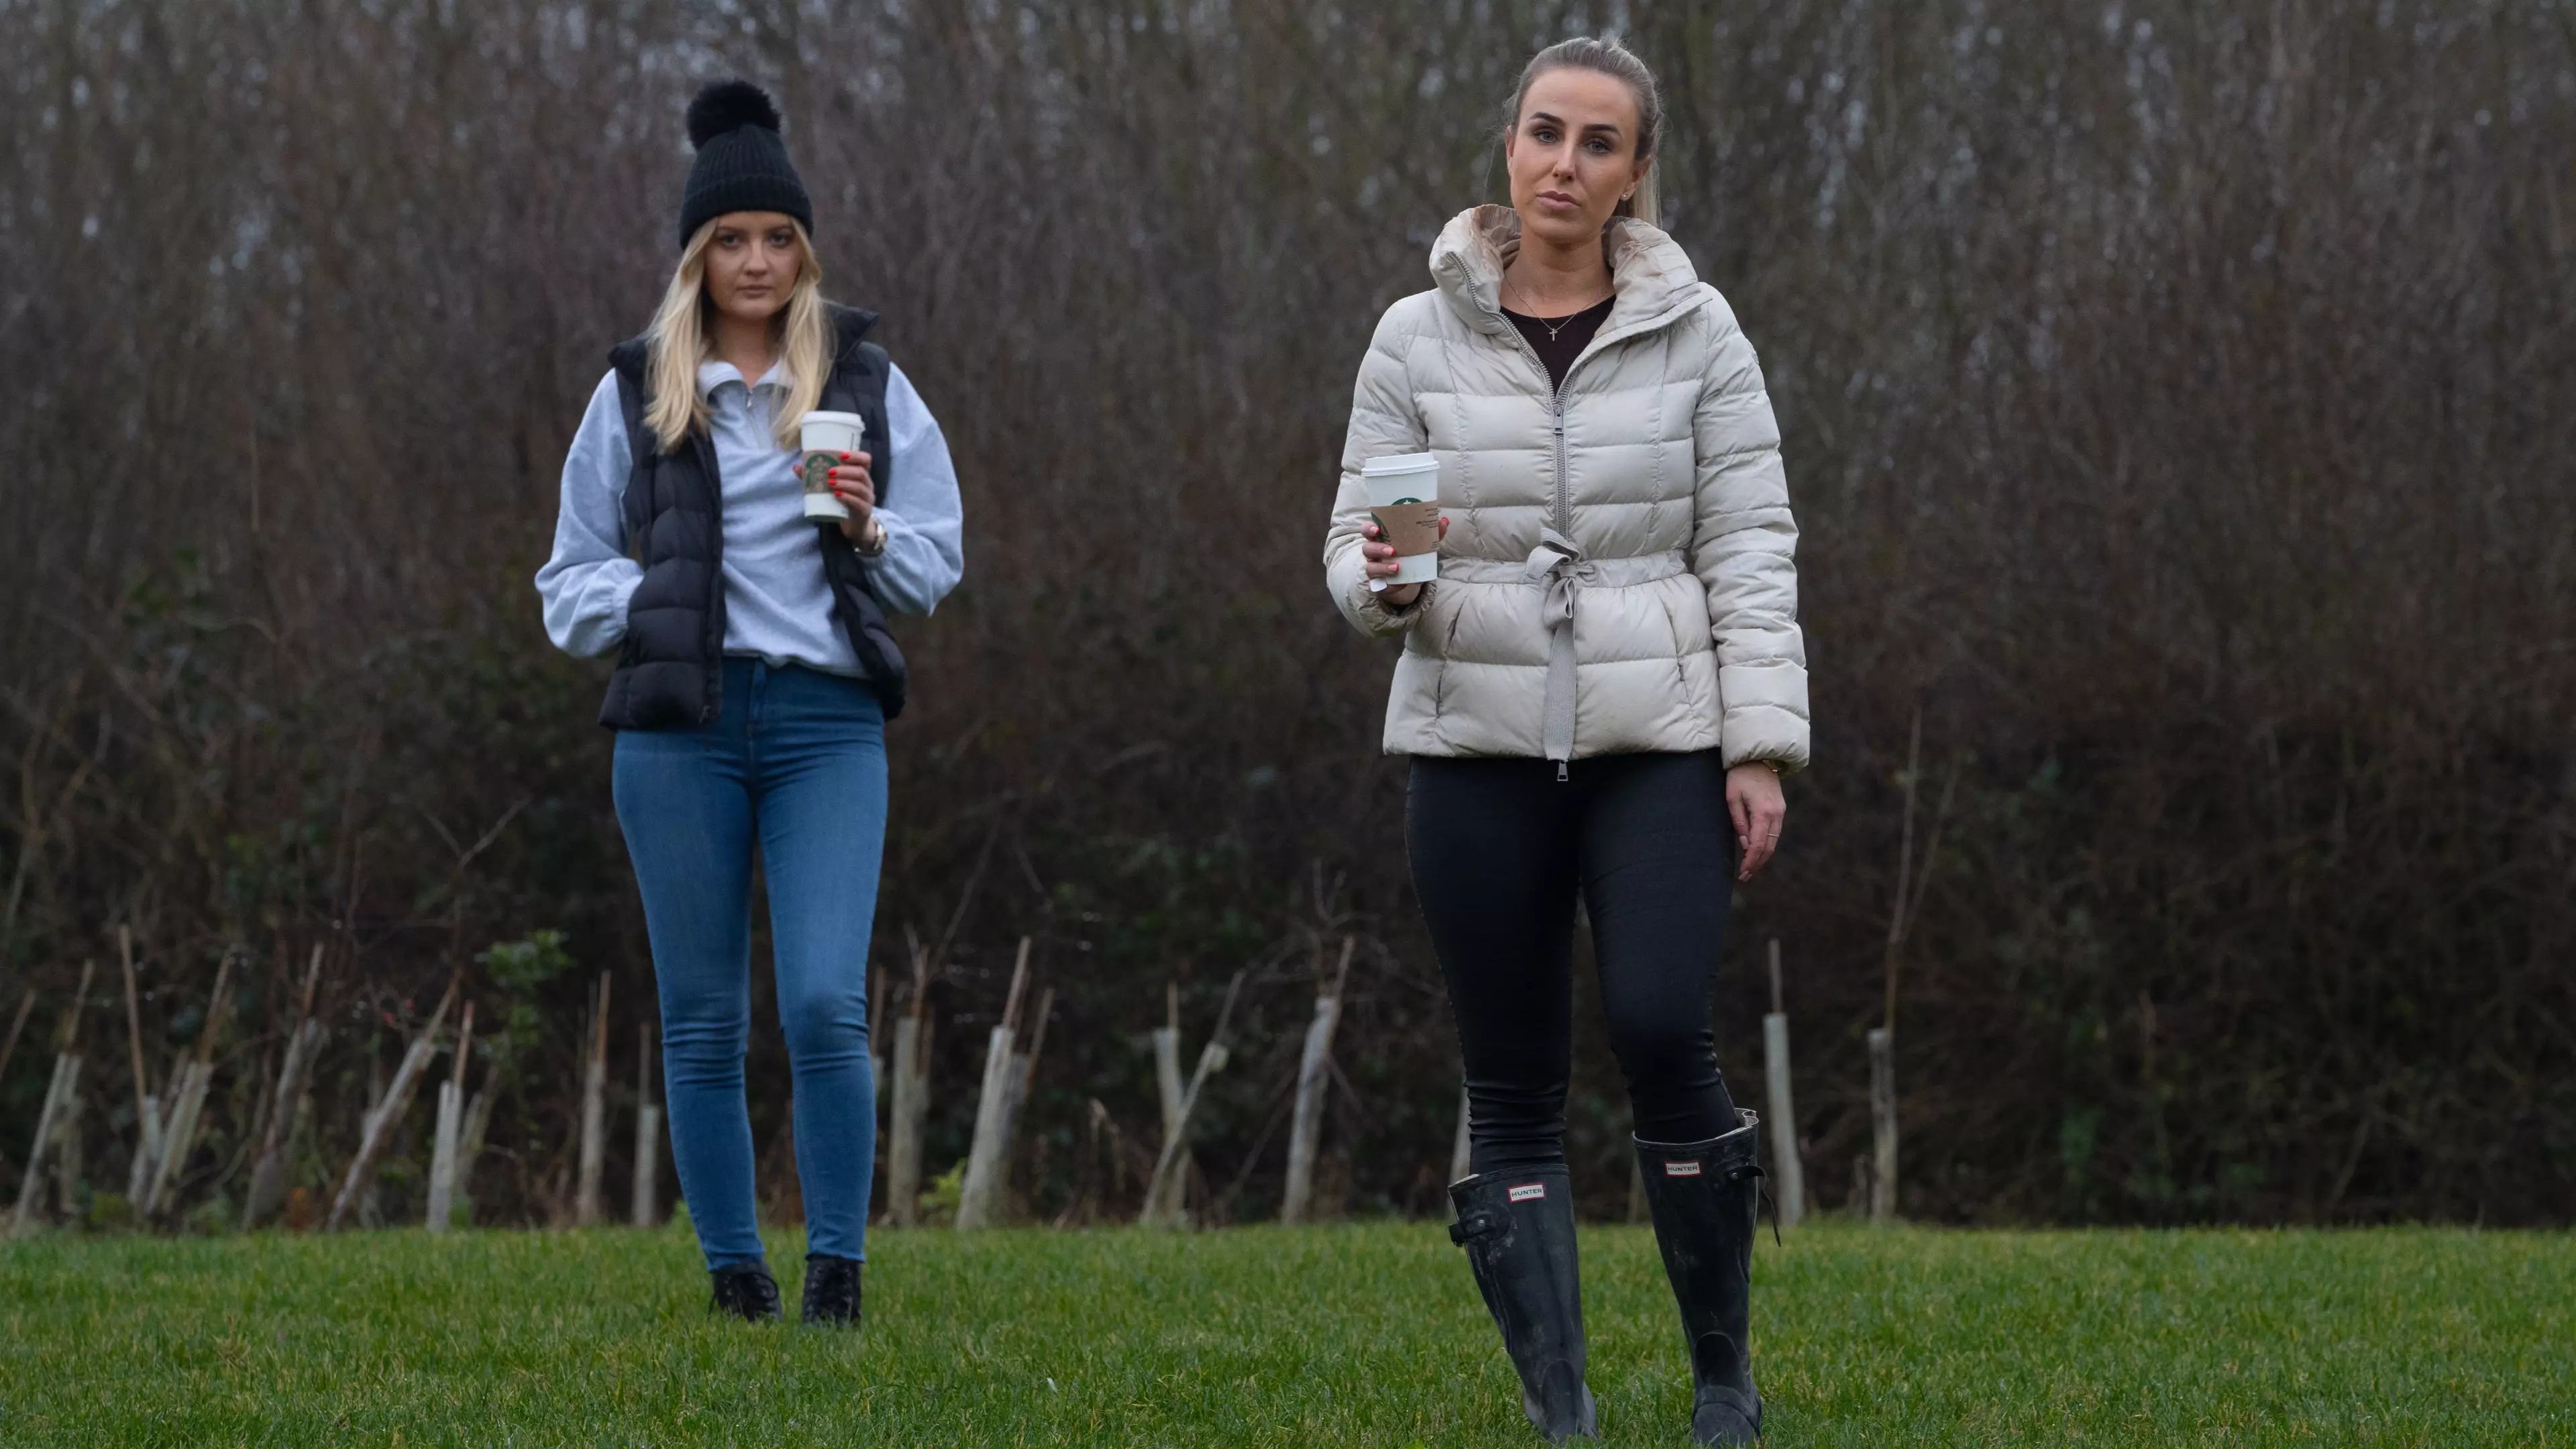 Police Withdraw £200 Fines For Women Who Drove Five Miles For A Walk